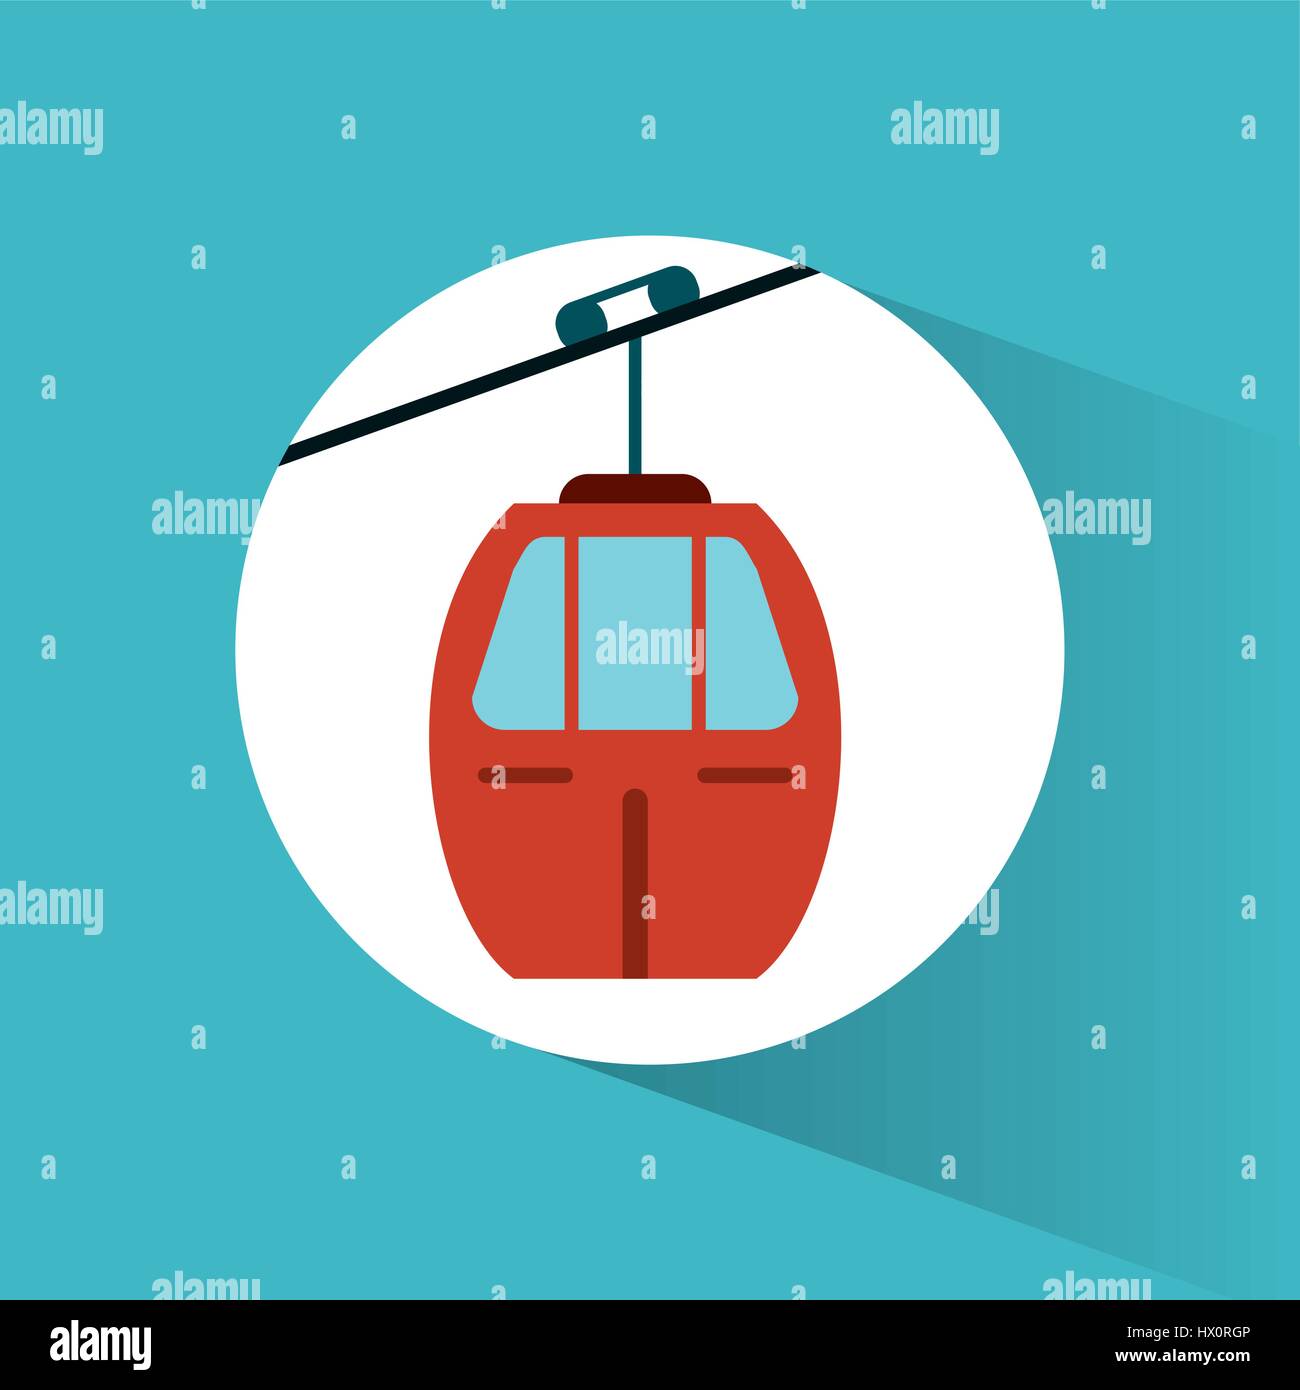 sky cable car transport vehicle image Stock Vector